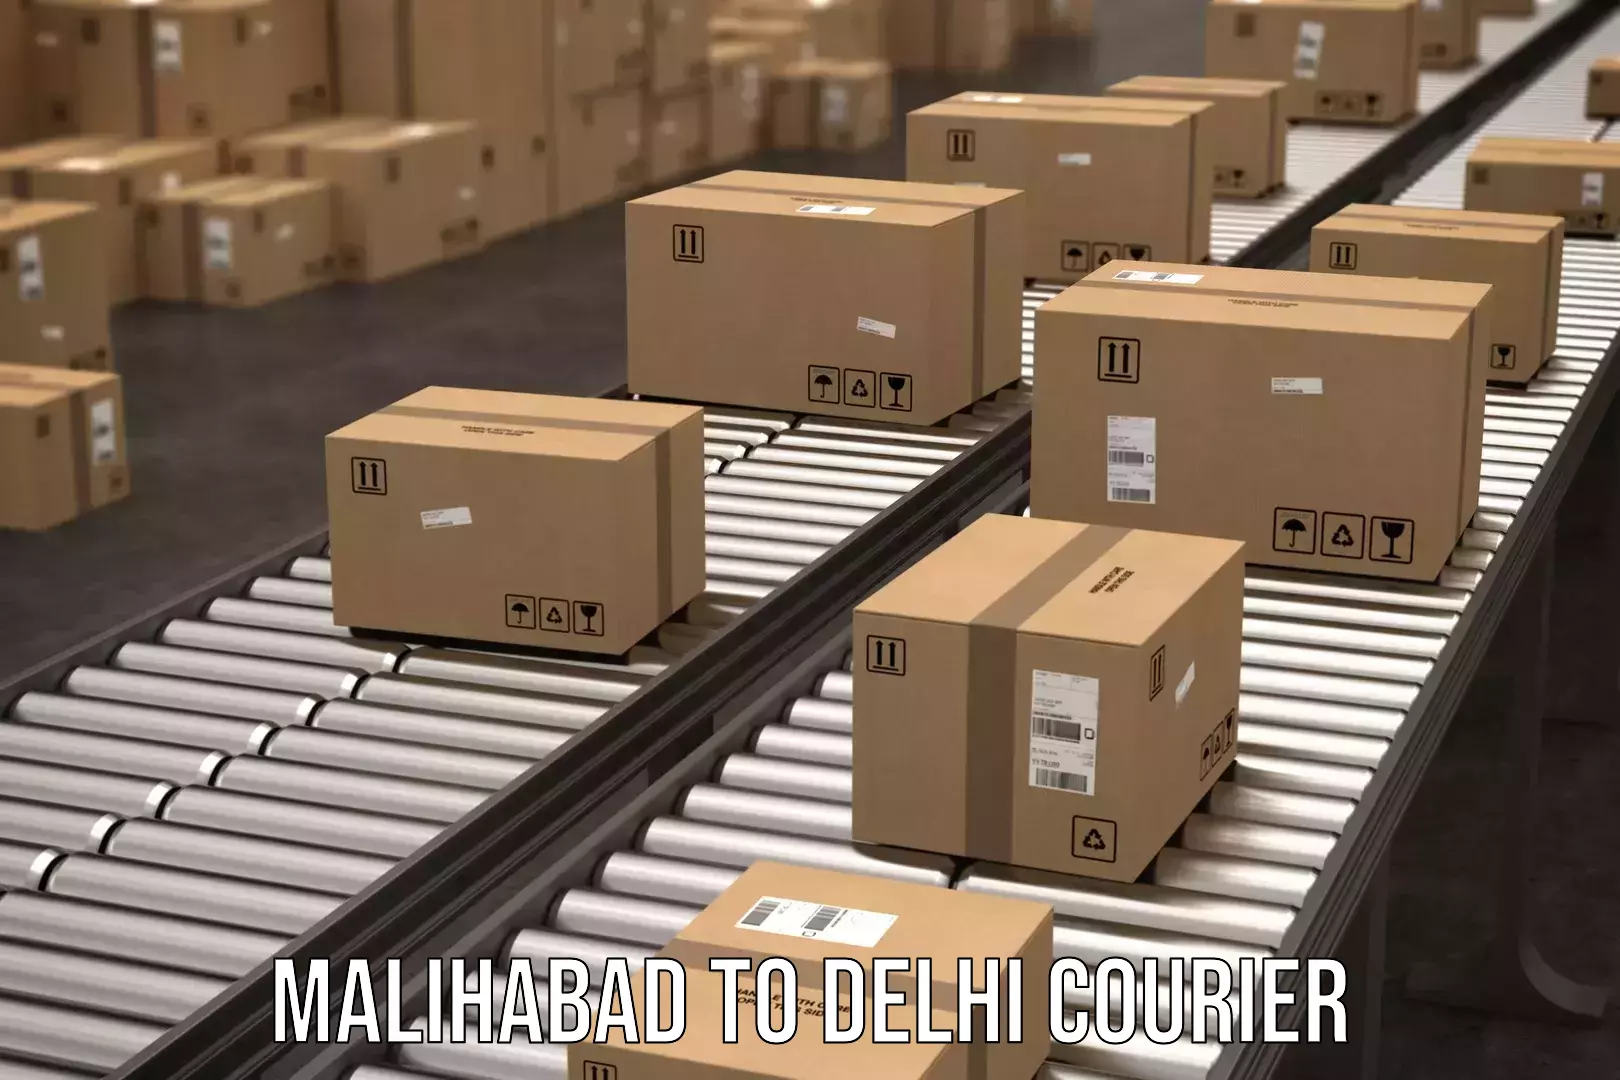 Global freight services Malihabad to NCR